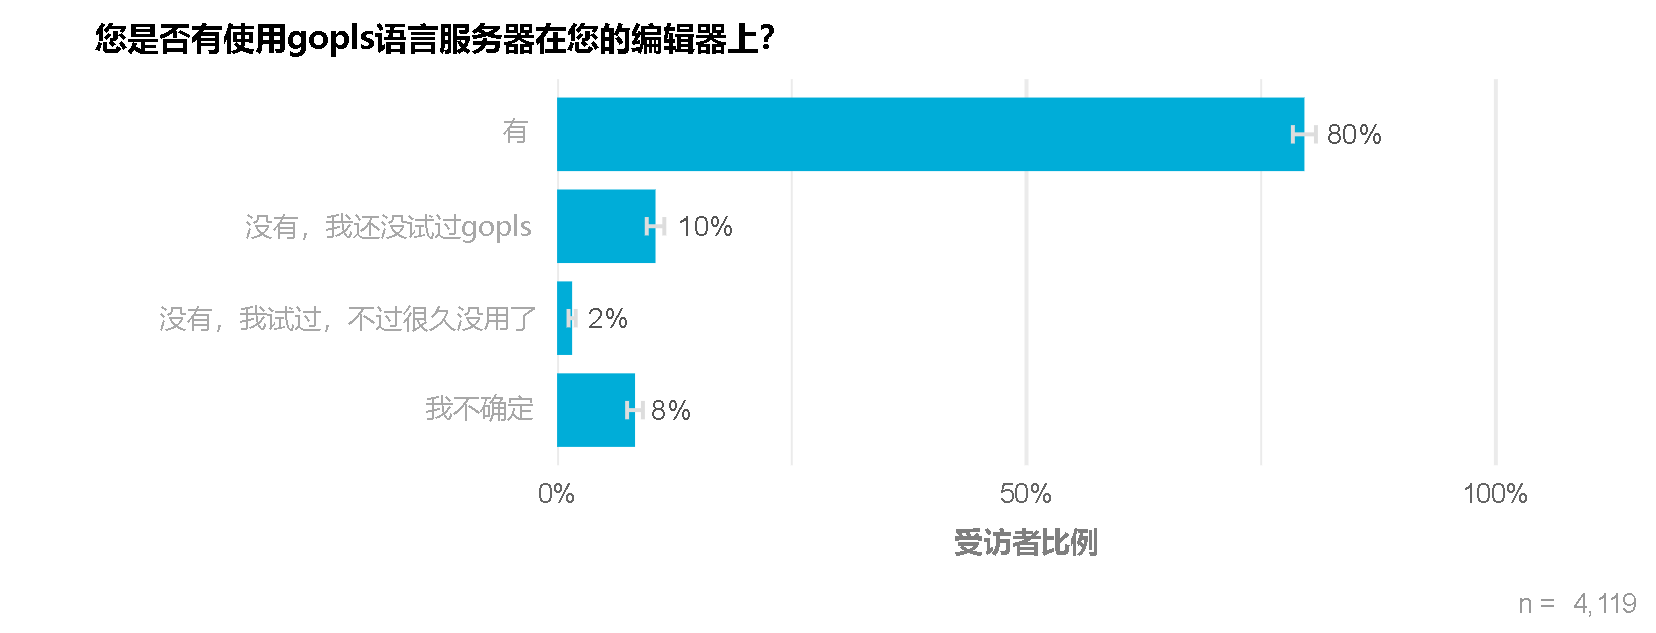 Chart showing only 2% of respondents disabled gopls